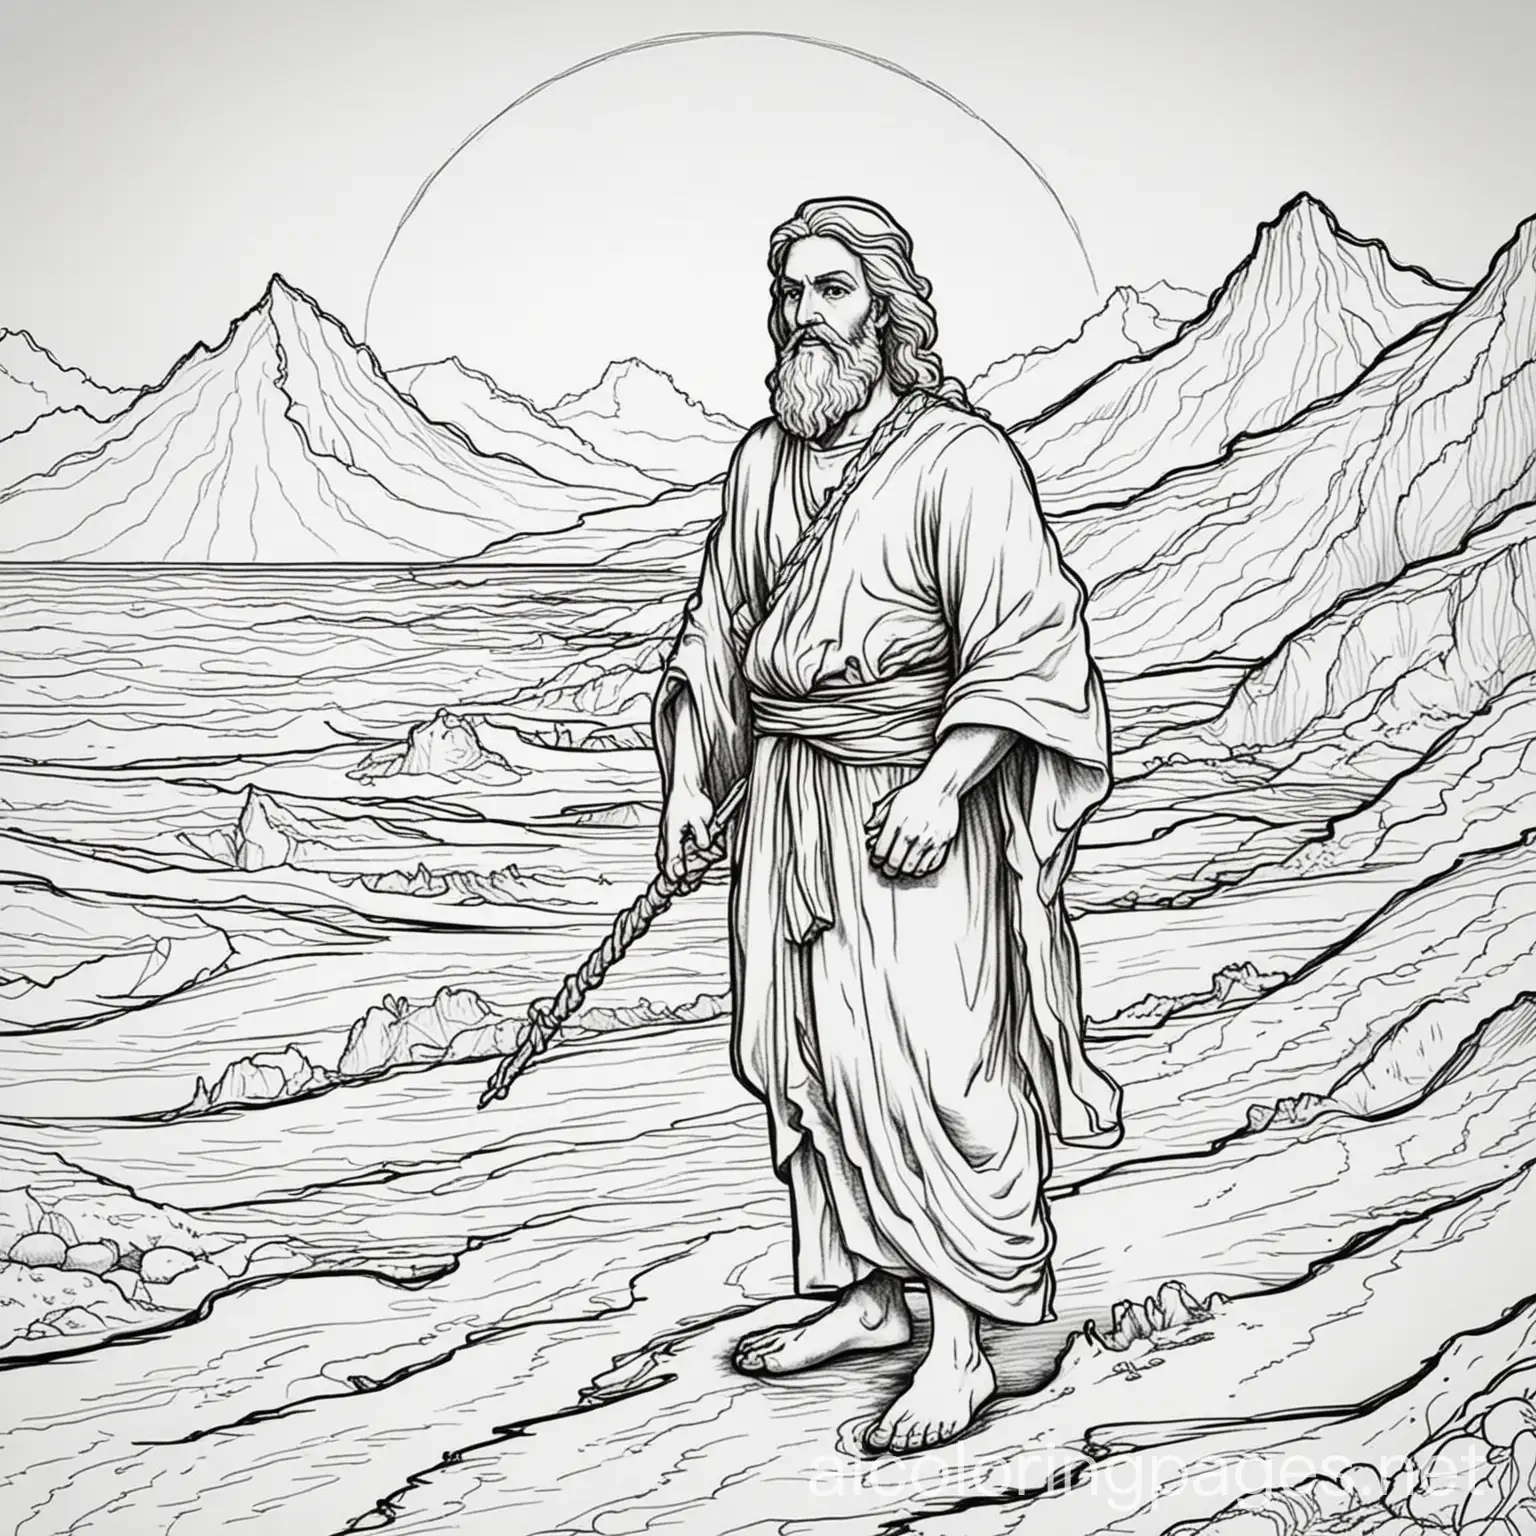 Create a basic and simple black and white outline with no detail. Leave blank space in the figures for coloring. Show Moses on the shore of the Red Sea. He stretches his one staff out to the Red Sea. The sea is beginning to part. Do not add mountains or clouds in the background. , Coloring Page, black and white, line art, white background, Simplicity, Ample White Space. The background of the coloring page is plain white to make it easy for young children to color within the lines. The outlines of all the subjects are easy to distinguish, making it simple for kids to color without too much difficulty